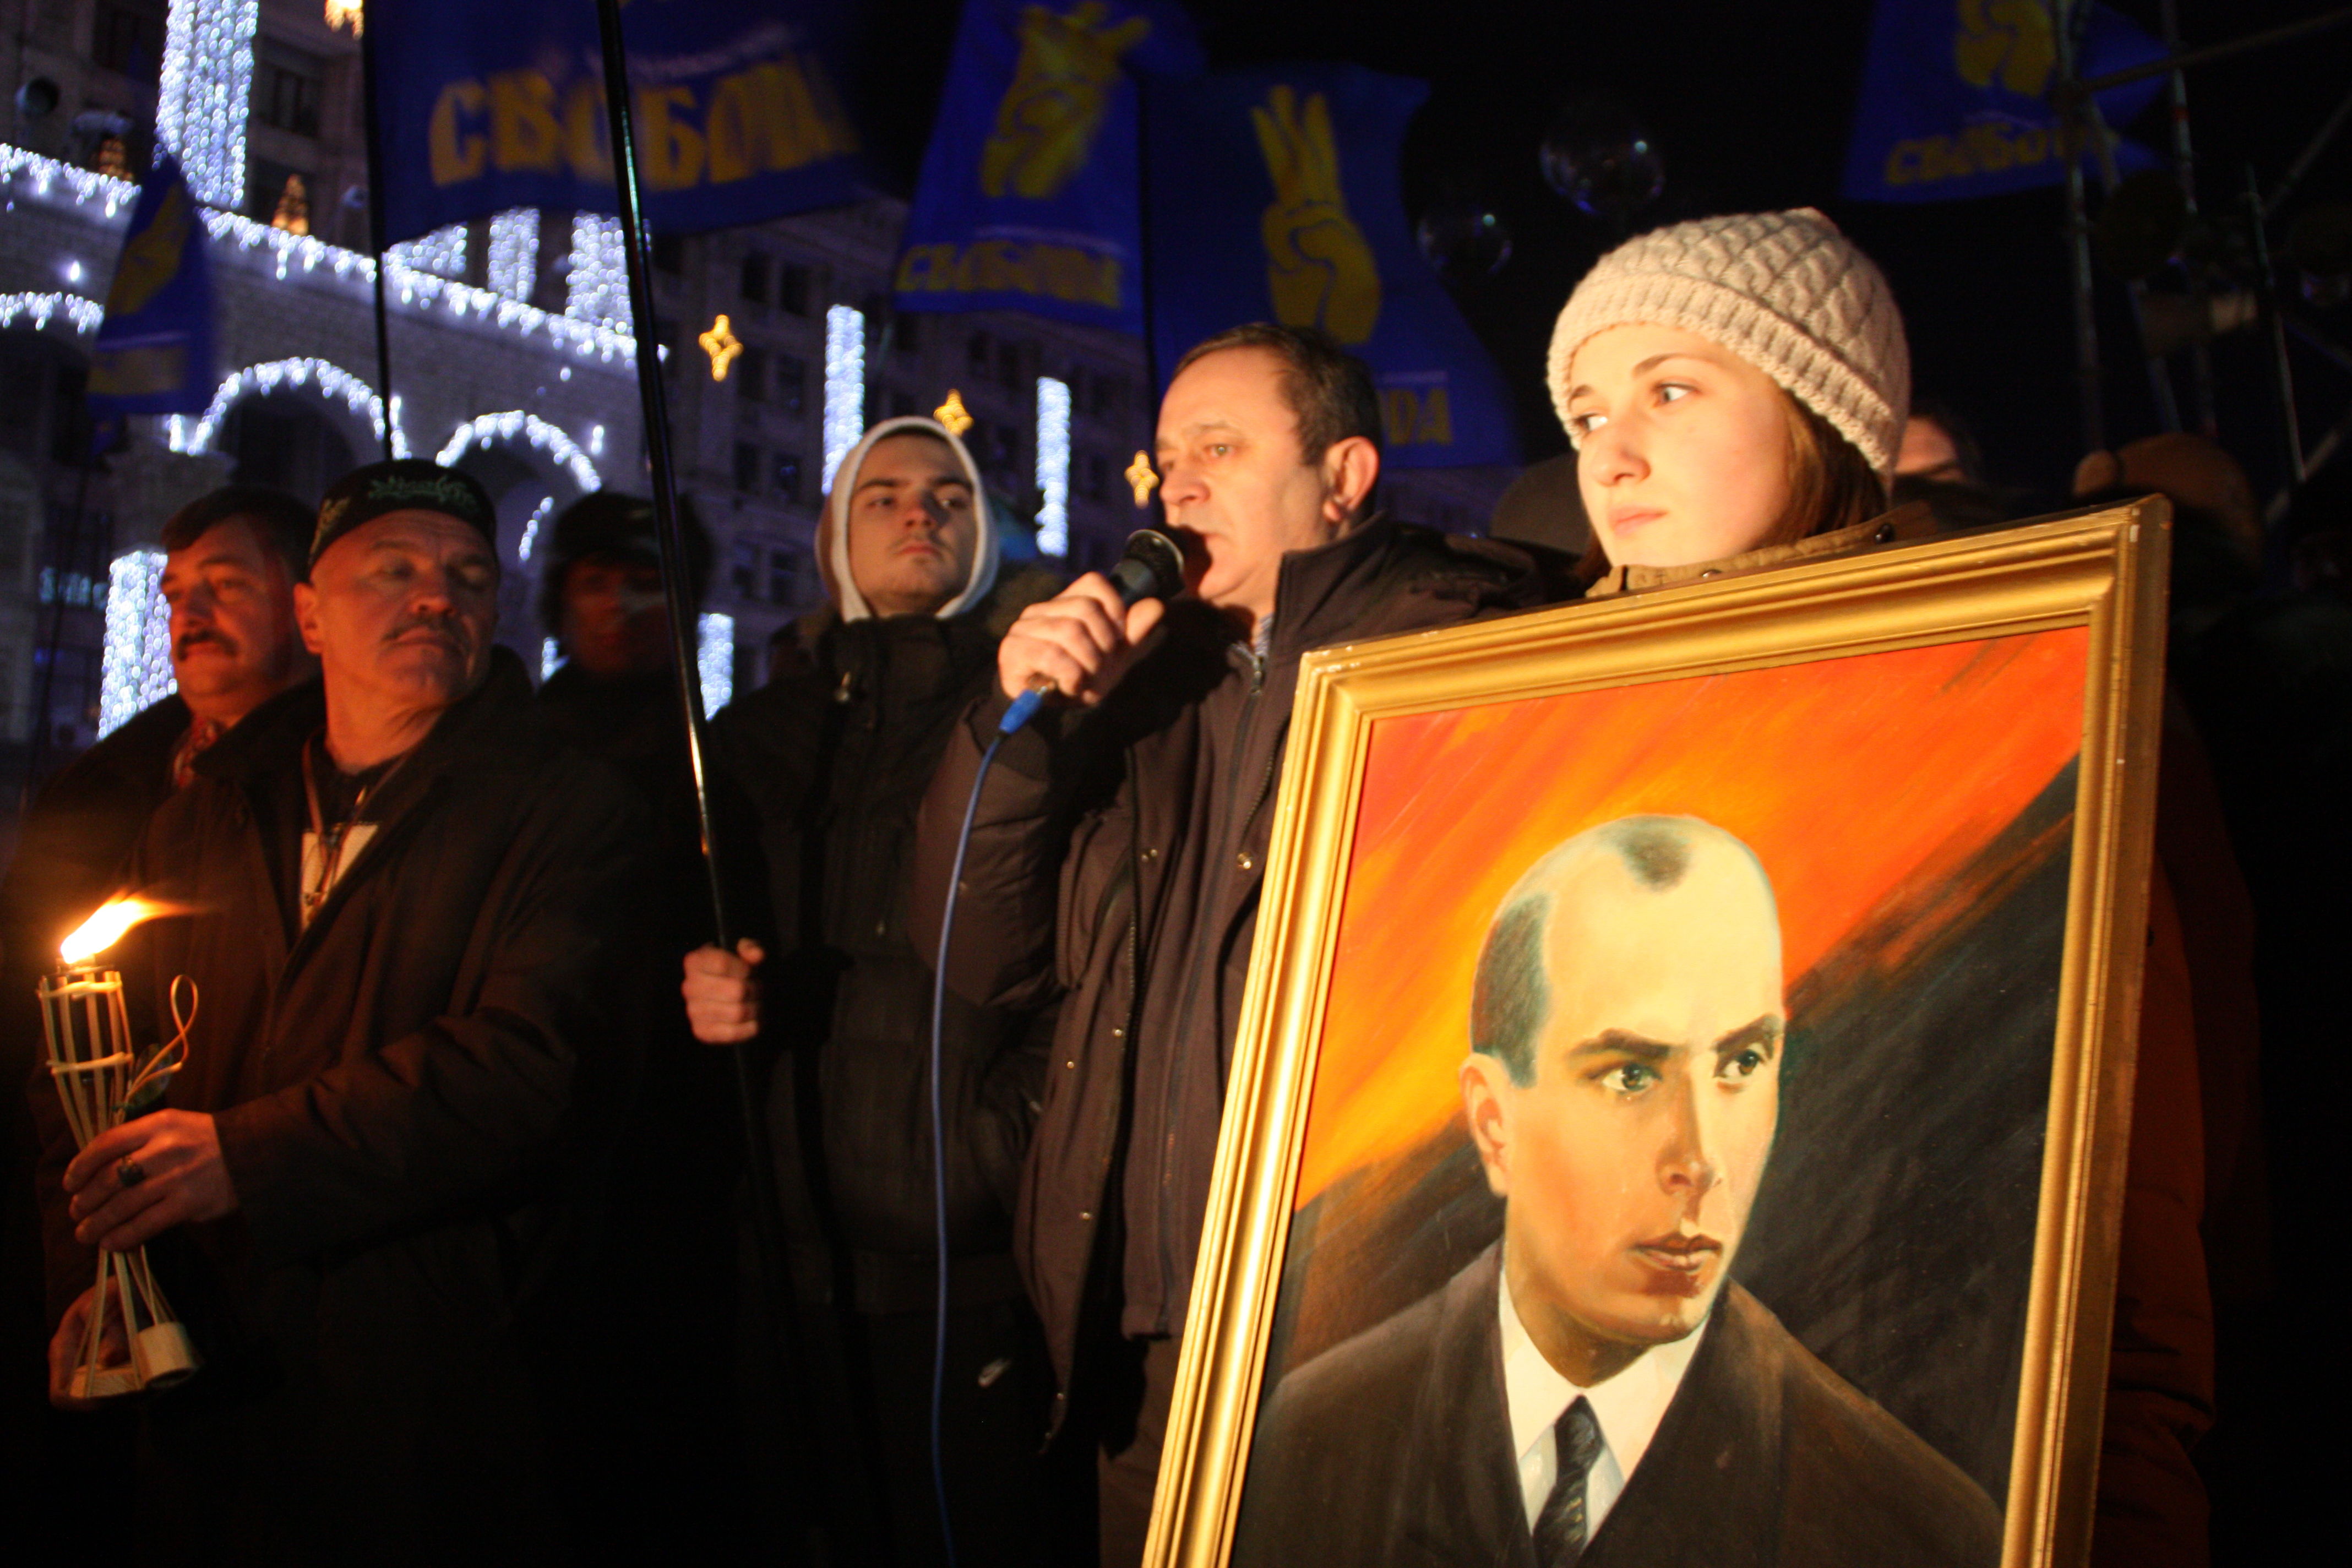 Ukraine transition government: Neo-Nazis in control -- Puppet Masters